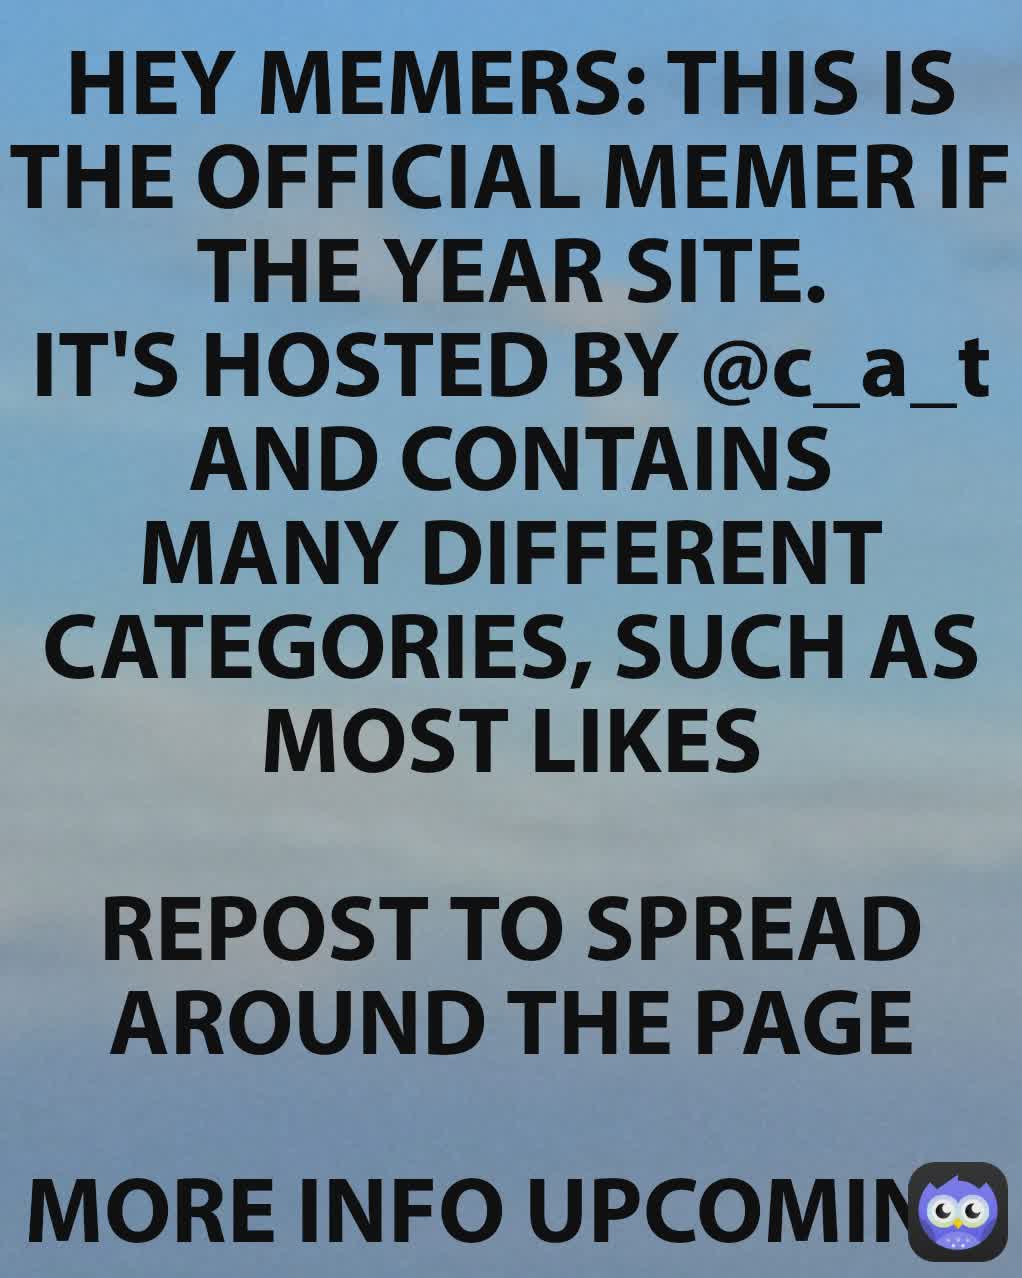 HEY MEMERS: THIS IS THE OFFICIAL MEMER IF THE YEAR SITE.
IT'S HOSTED BY @c_a_t
AND CONTAINS MANY DIFFERENT CATEGORIES, SUCH AS MOST LIKES

REPOST TO SPREAD AROUND THE PAGE

MORE INFO UPCOMING